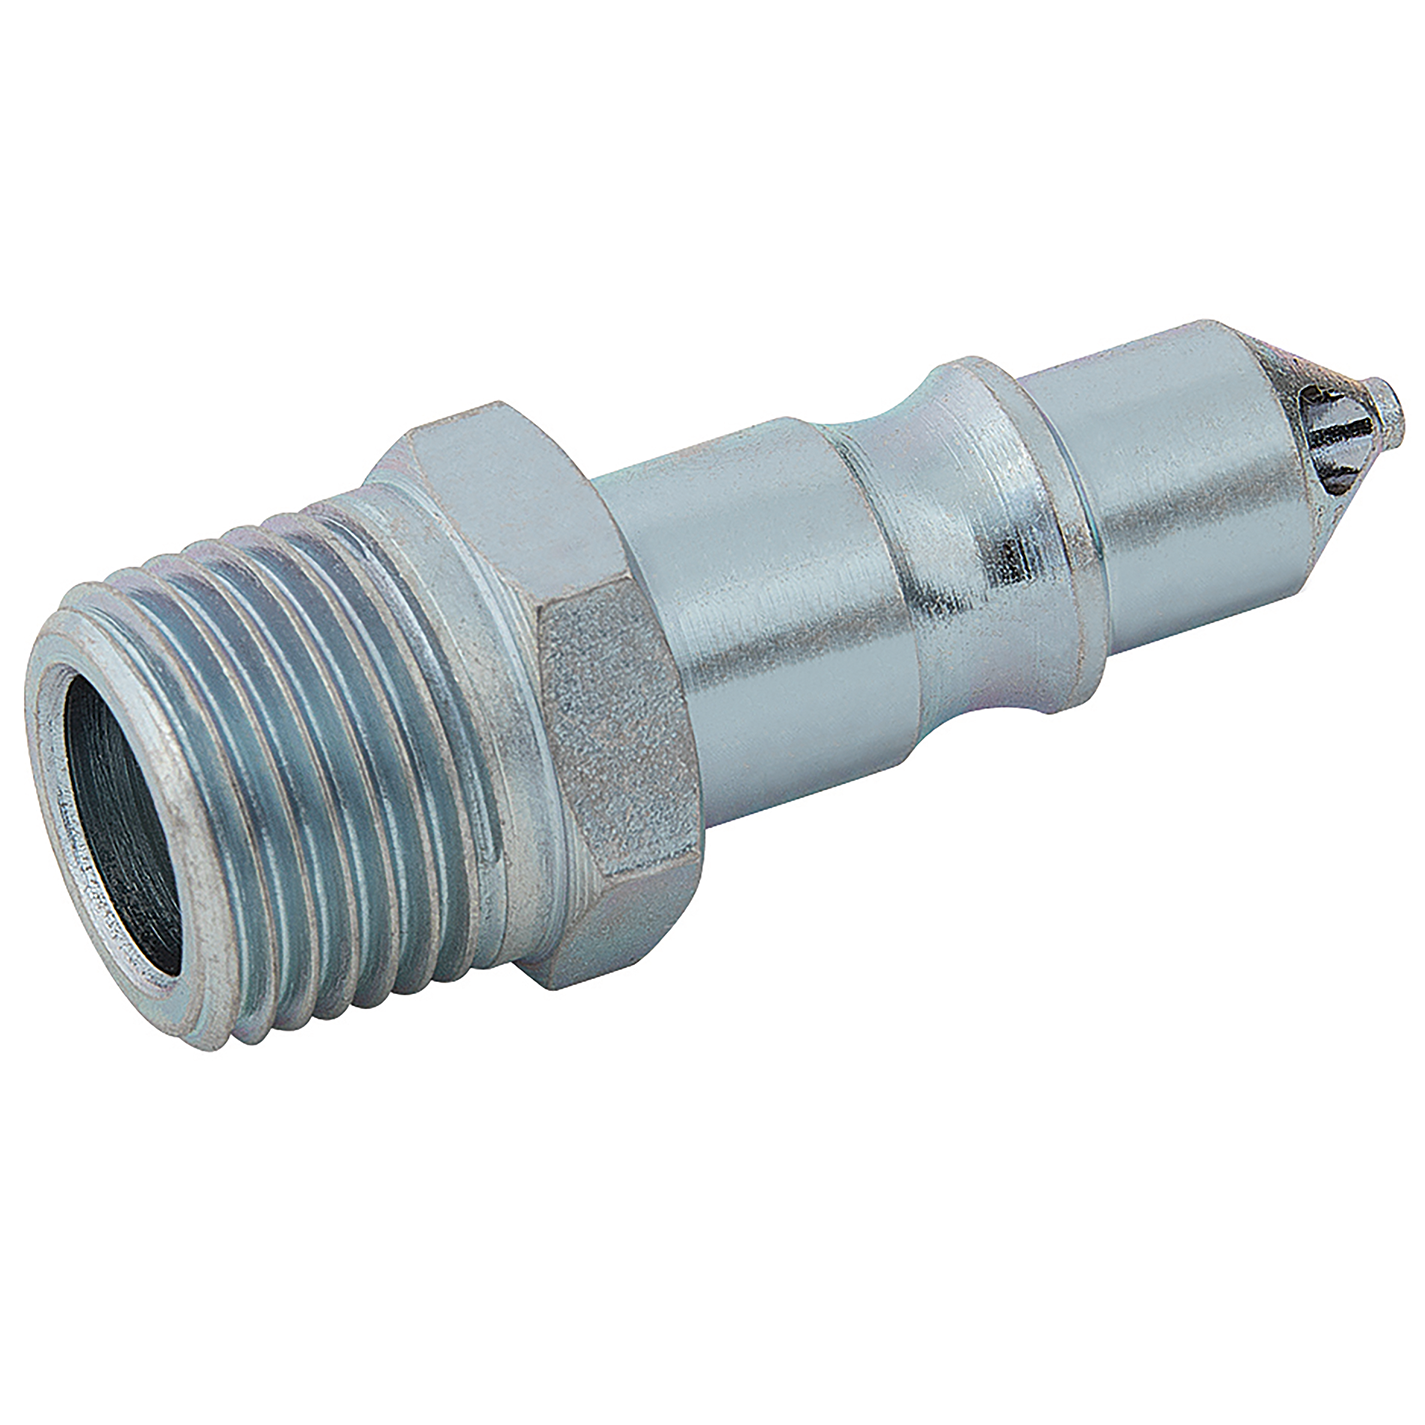 1/2" BSPT Male Safety Adaptor 100 Series